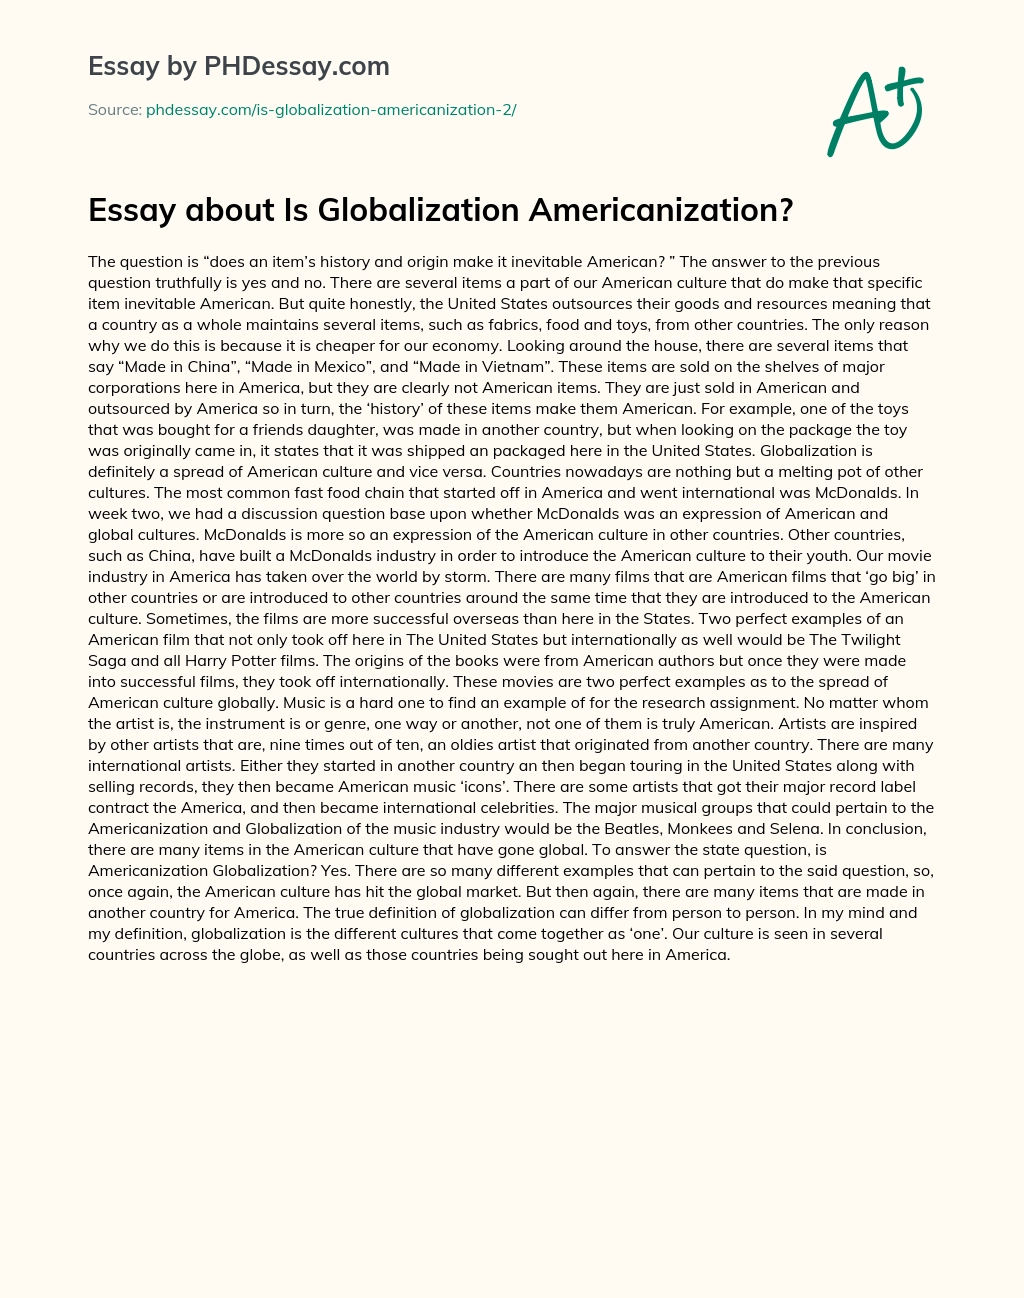 Essay about Is Globalization Americanization? essay